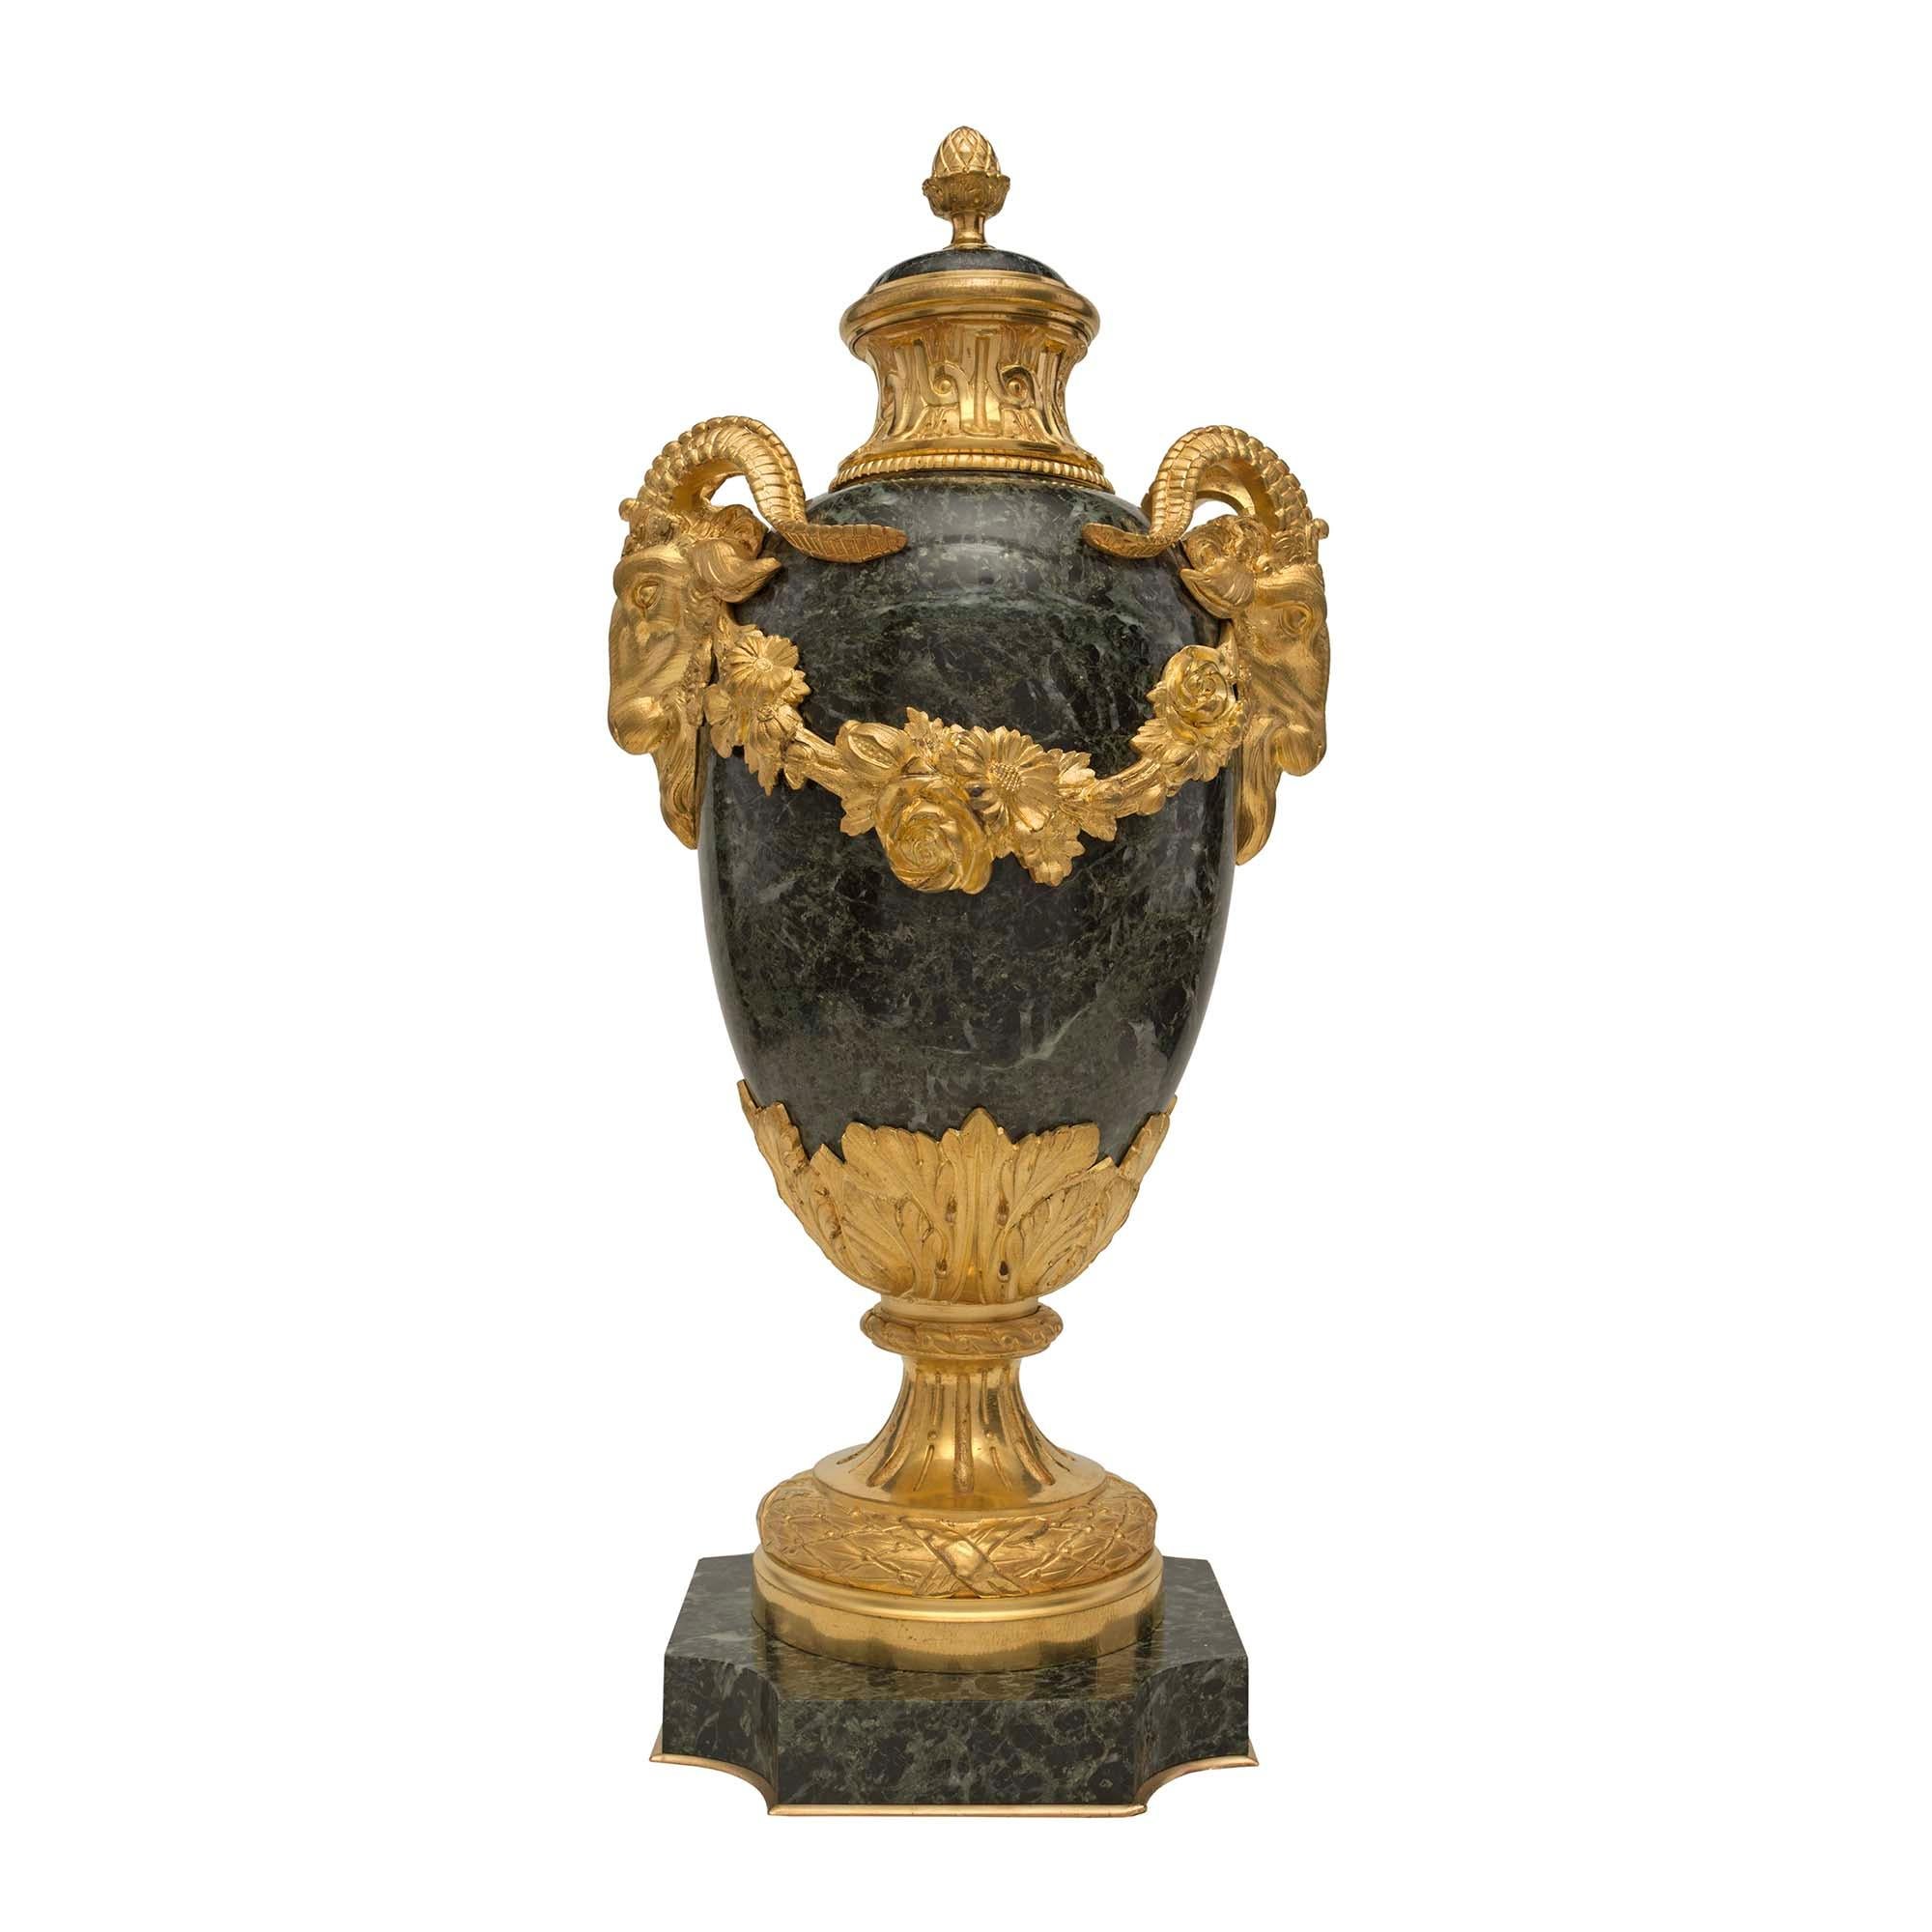 A most elegant pair of French 19th century Louis XVI st. Vert Antique lidded marble urns. Each urn is raised by a square base with concave corner and a decorative bottom ormolu fillet. The fluted socle pedestal is decorated with a tied berried